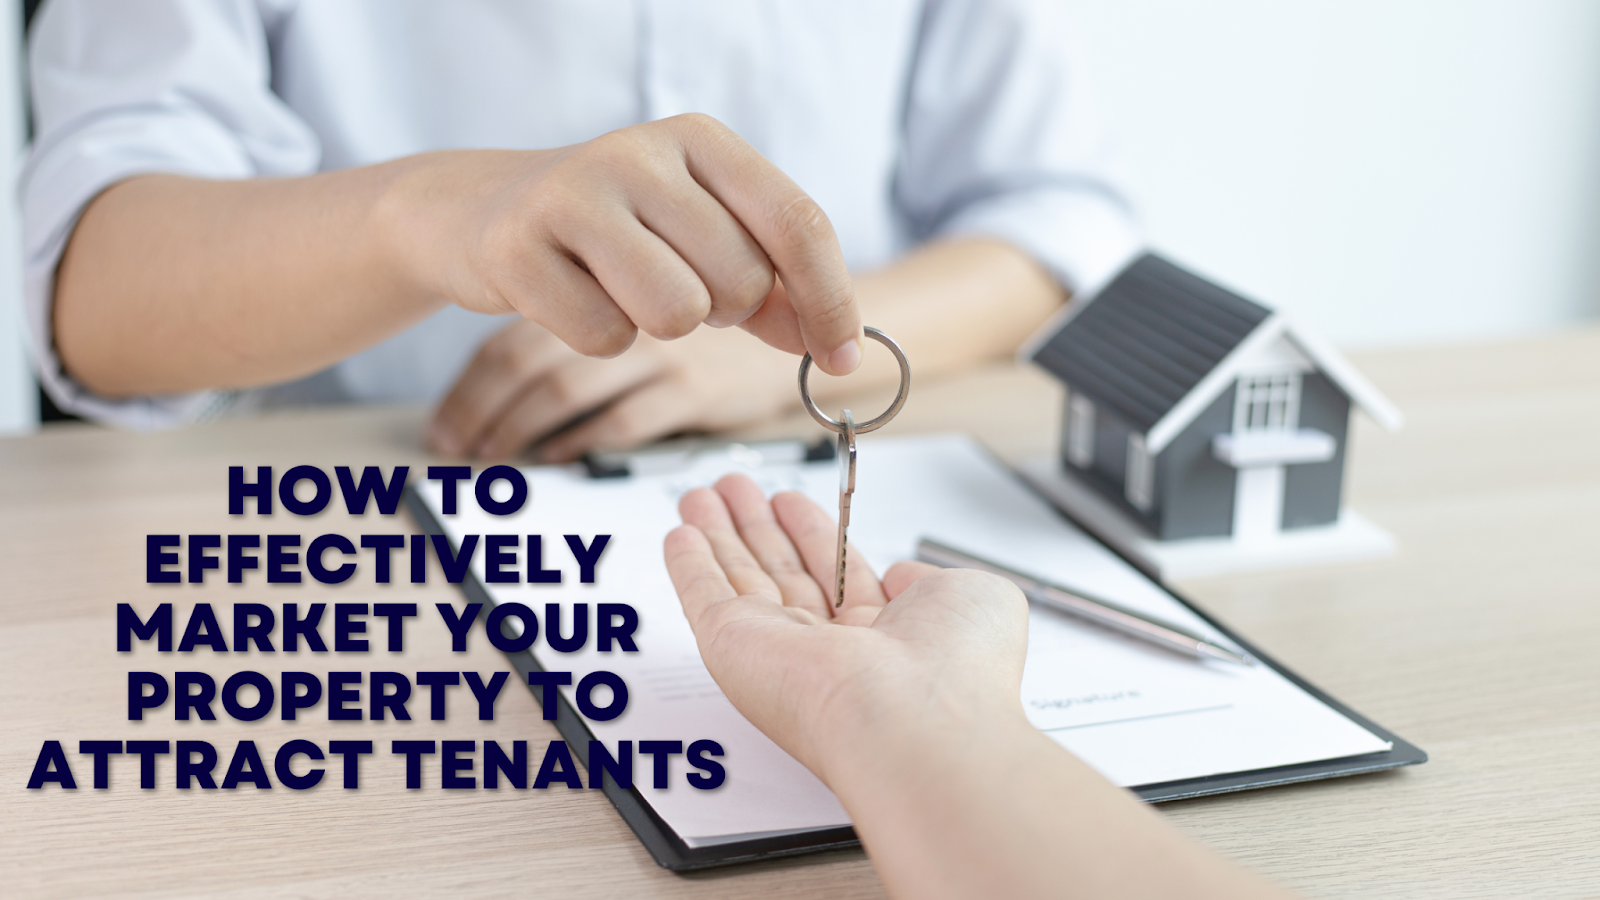 How to Effectively Market Your Property to Attract Tenants